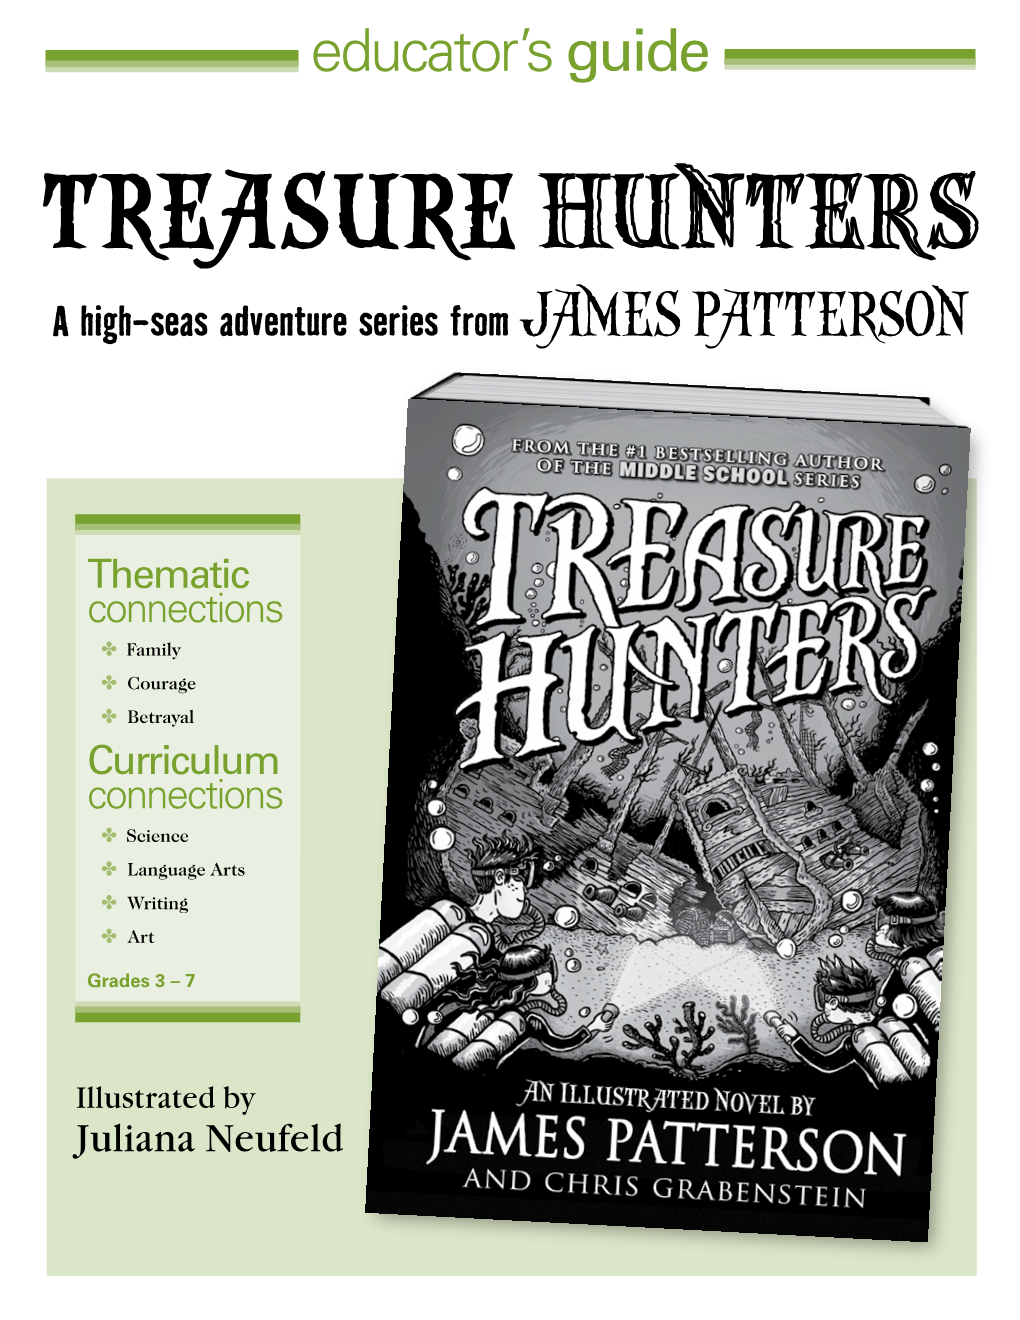 TREASURE HUNTERS a High-Seas Adventure Series from JAMES PATTERSON